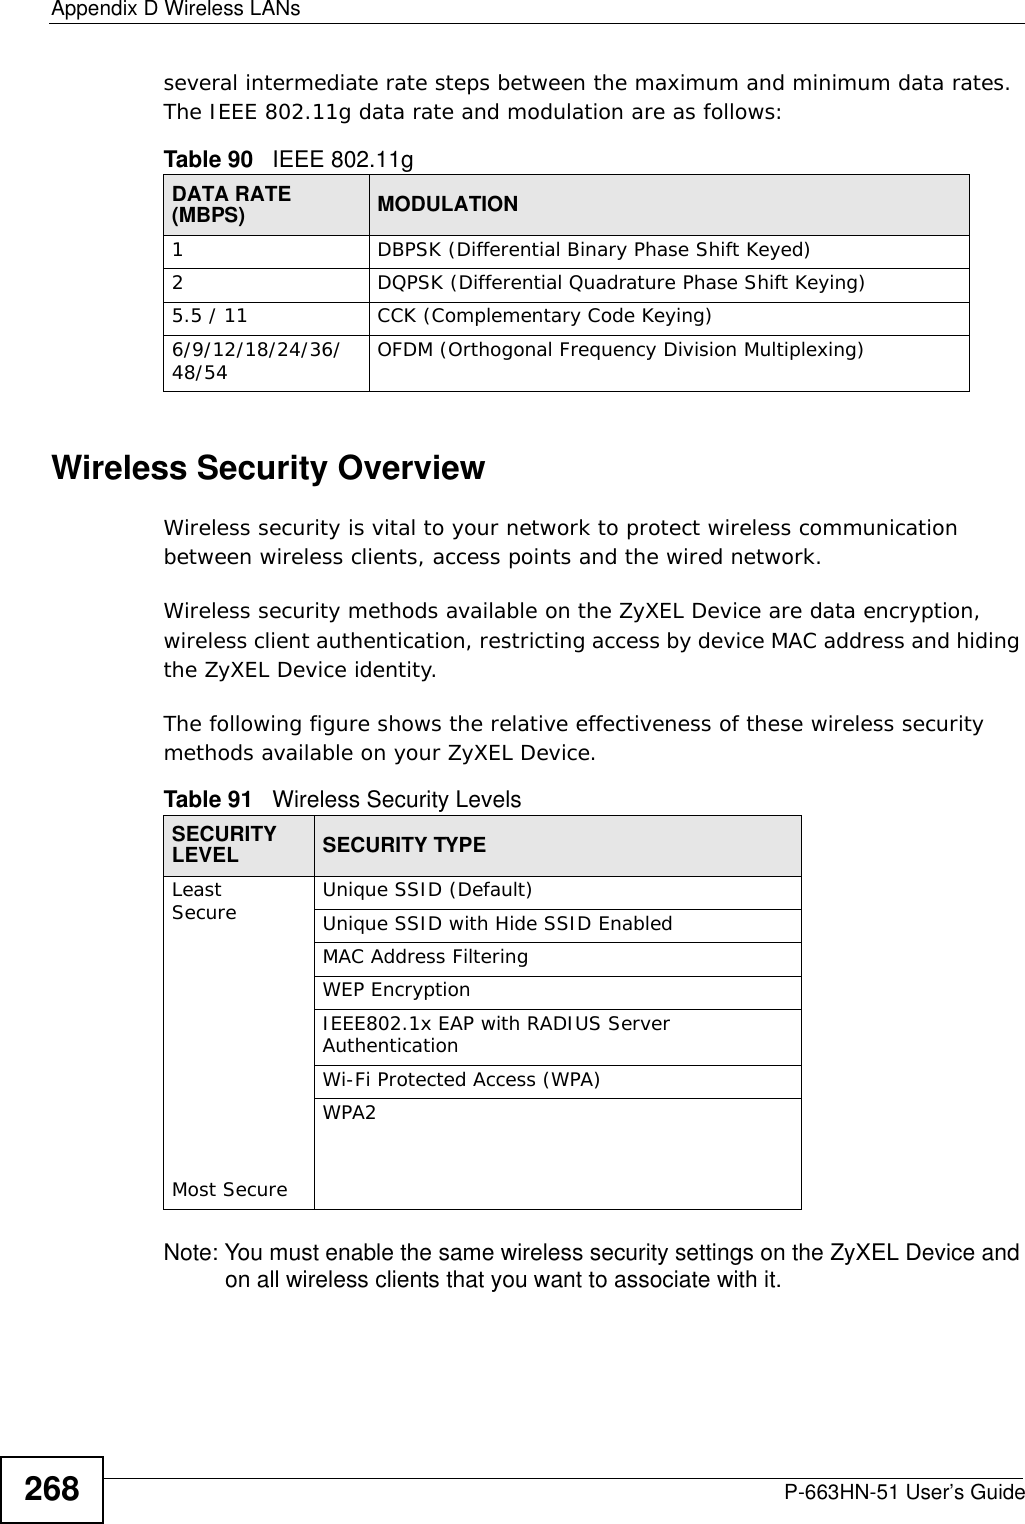 Appendix D Wireless LANsP-663HN-51 User’s Guide268several intermediate rate steps between the maximum and minimum data rates. The IEEE 802.11g data rate and modulation are as follows:Wireless Security OverviewWireless security is vital to your network to protect wireless communication between wireless clients, access points and the wired network.Wireless security methods available on the ZyXEL Device are data encryption, wireless client authentication, restricting access by device MAC address and hiding the ZyXEL Device identity.The following figure shows the relative effectiveness of these wireless security methods available on your ZyXEL Device.Note: You must enable the same wireless security settings on the ZyXEL Device and on all wireless clients that you want to associate with it. Table 90   IEEE 802.11gDATA RATE (MBPS) MODULATION1 DBPSK (Differential Binary Phase Shift Keyed)2 DQPSK (Differential Quadrature Phase Shift Keying)5.5 / 11 CCK (Complementary Code Keying) 6/9/12/18/24/36/48/54 OFDM (Orthogonal Frequency Division Multiplexing) Table 91   Wireless Security LevelsSECURITY LEVEL SECURITY TYPELeast       Secure                                                                                  Most SecureUnique SSID (Default)Unique SSID with Hide SSID EnabledMAC Address FilteringWEP EncryptionIEEE802.1x EAP with RADIUS Server AuthenticationWi-Fi Protected Access (WPA)WPA2